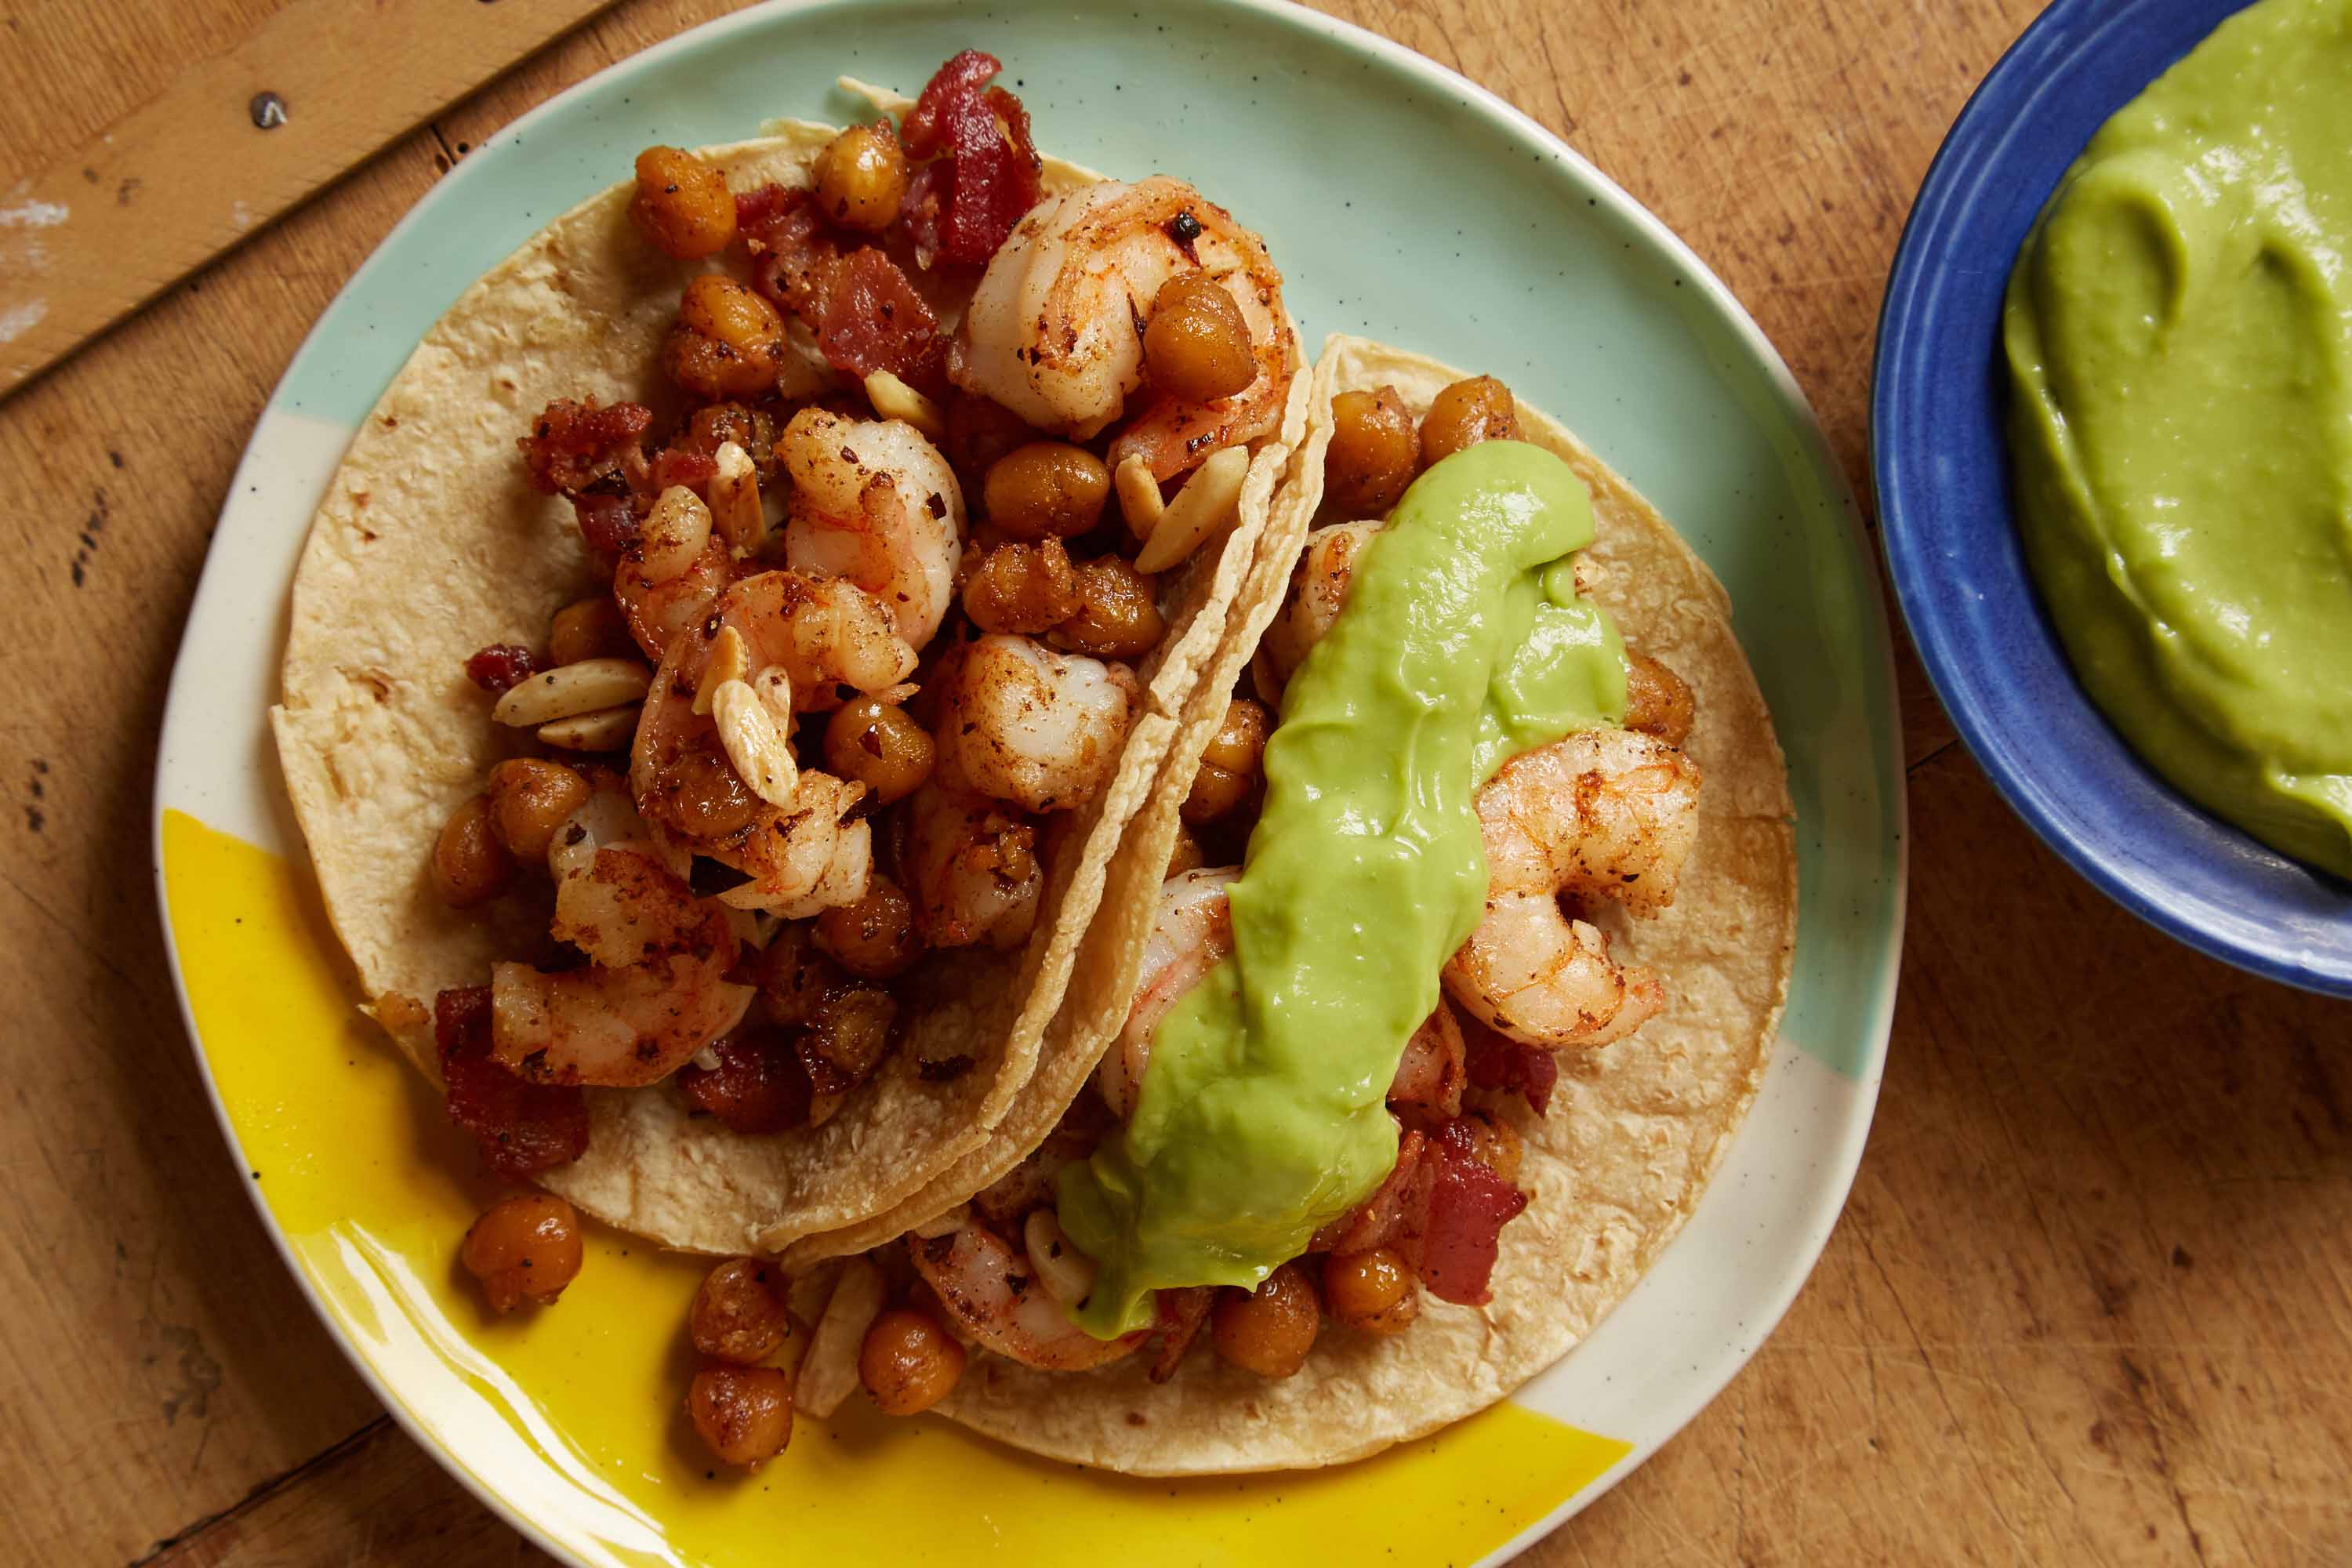 Shrimp, Bacon and Crispy Chickpea Tacos with Smooth Guacamole